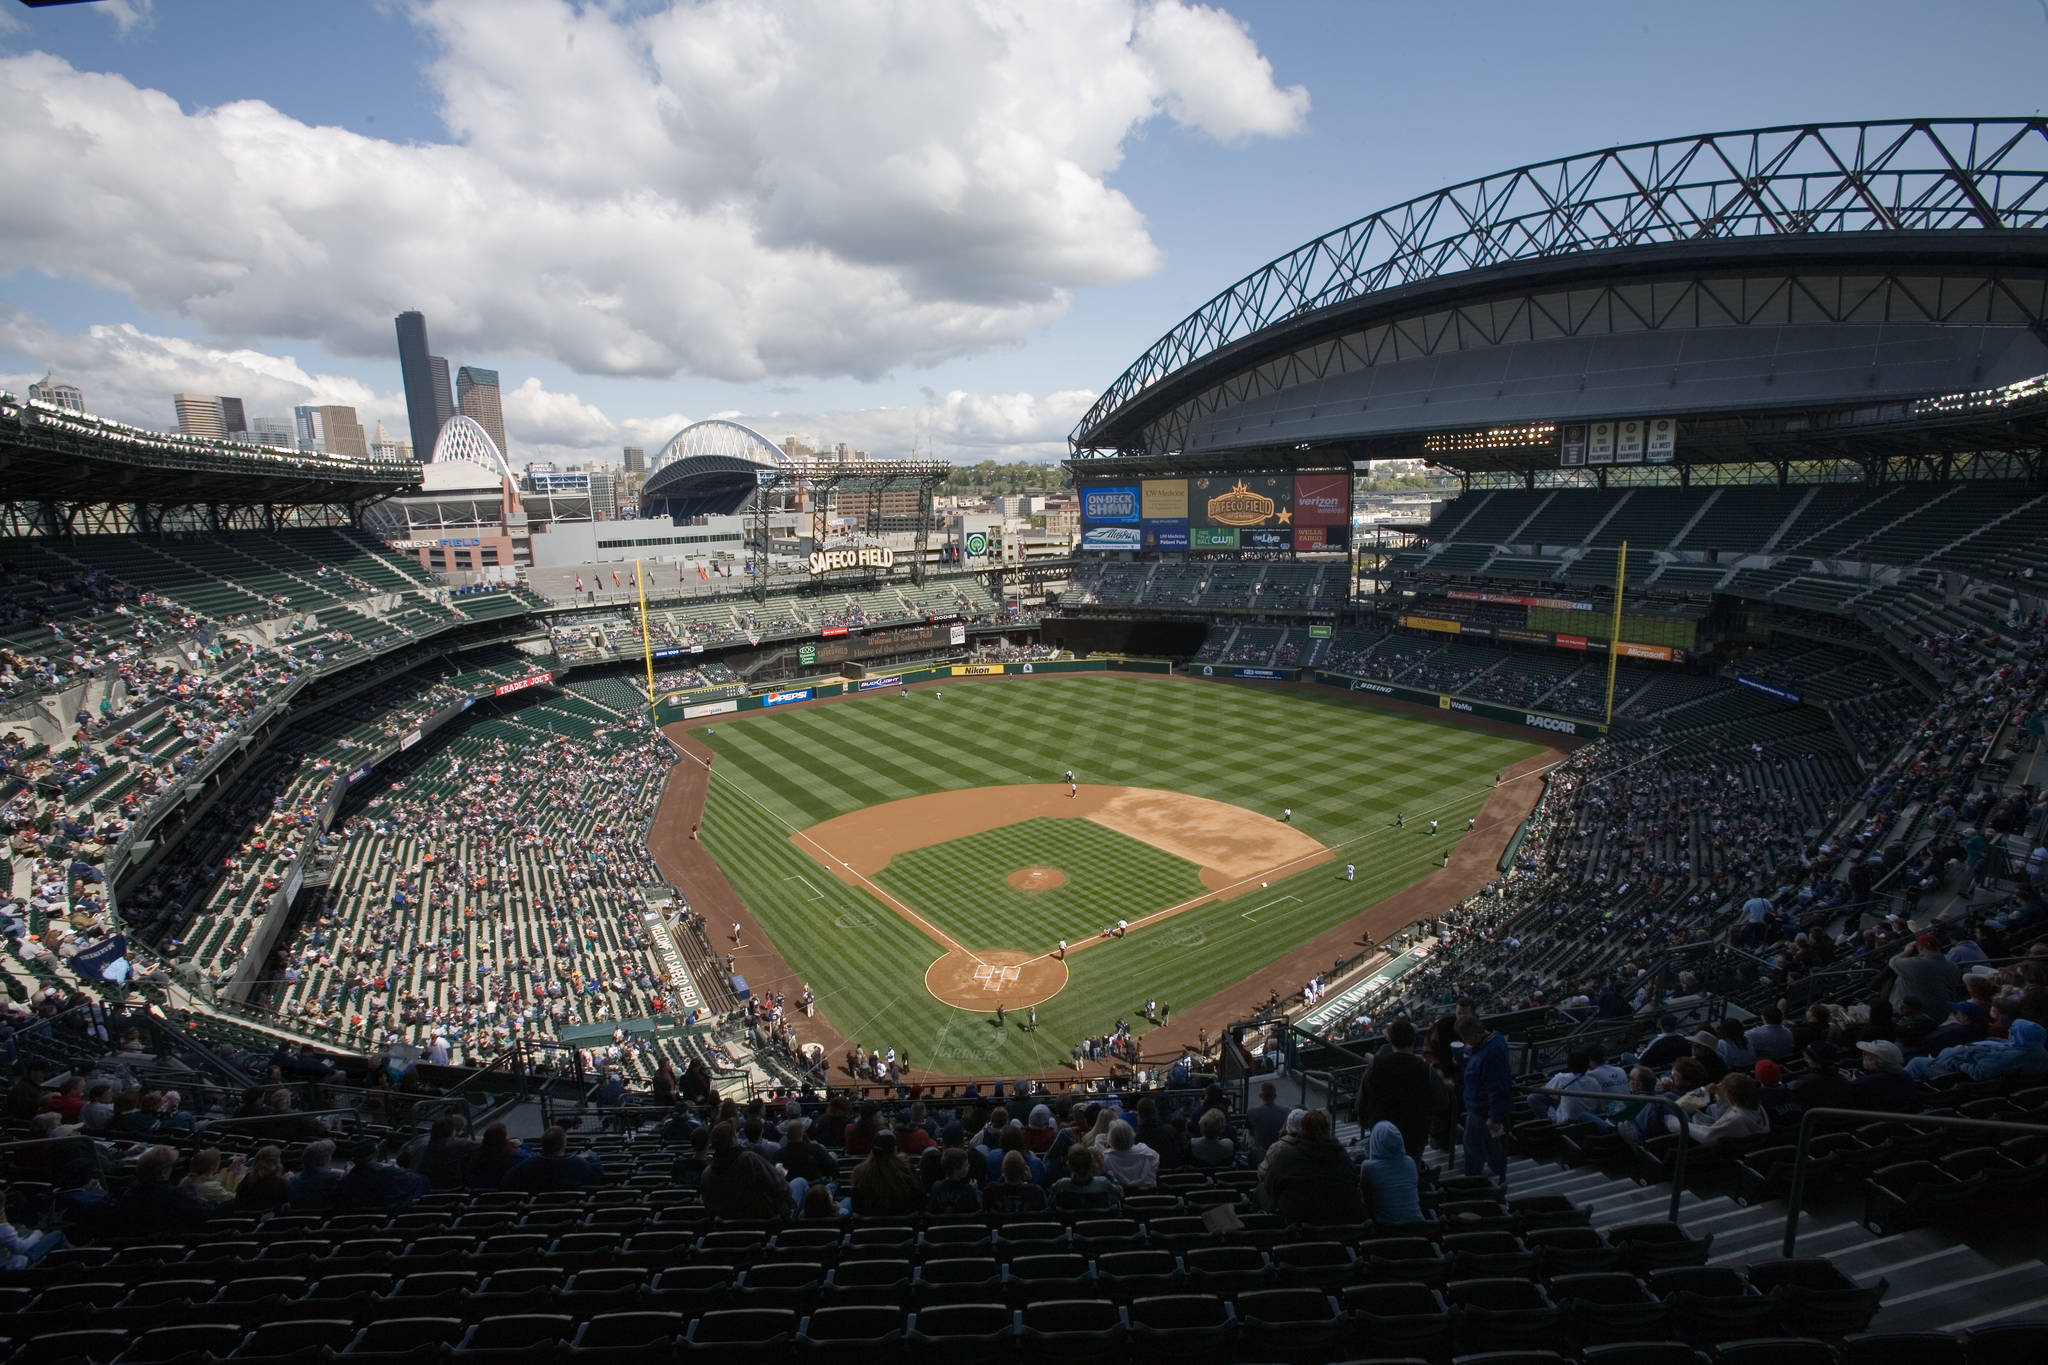 King County Councilmember Jeanne Kohl-Welles, a previous sponsor of the legislation to put $180 million in public funding towards Safeco Field upkeep, has pulled her support from the bill. Photo by Cacophony/Wikipedia Commons